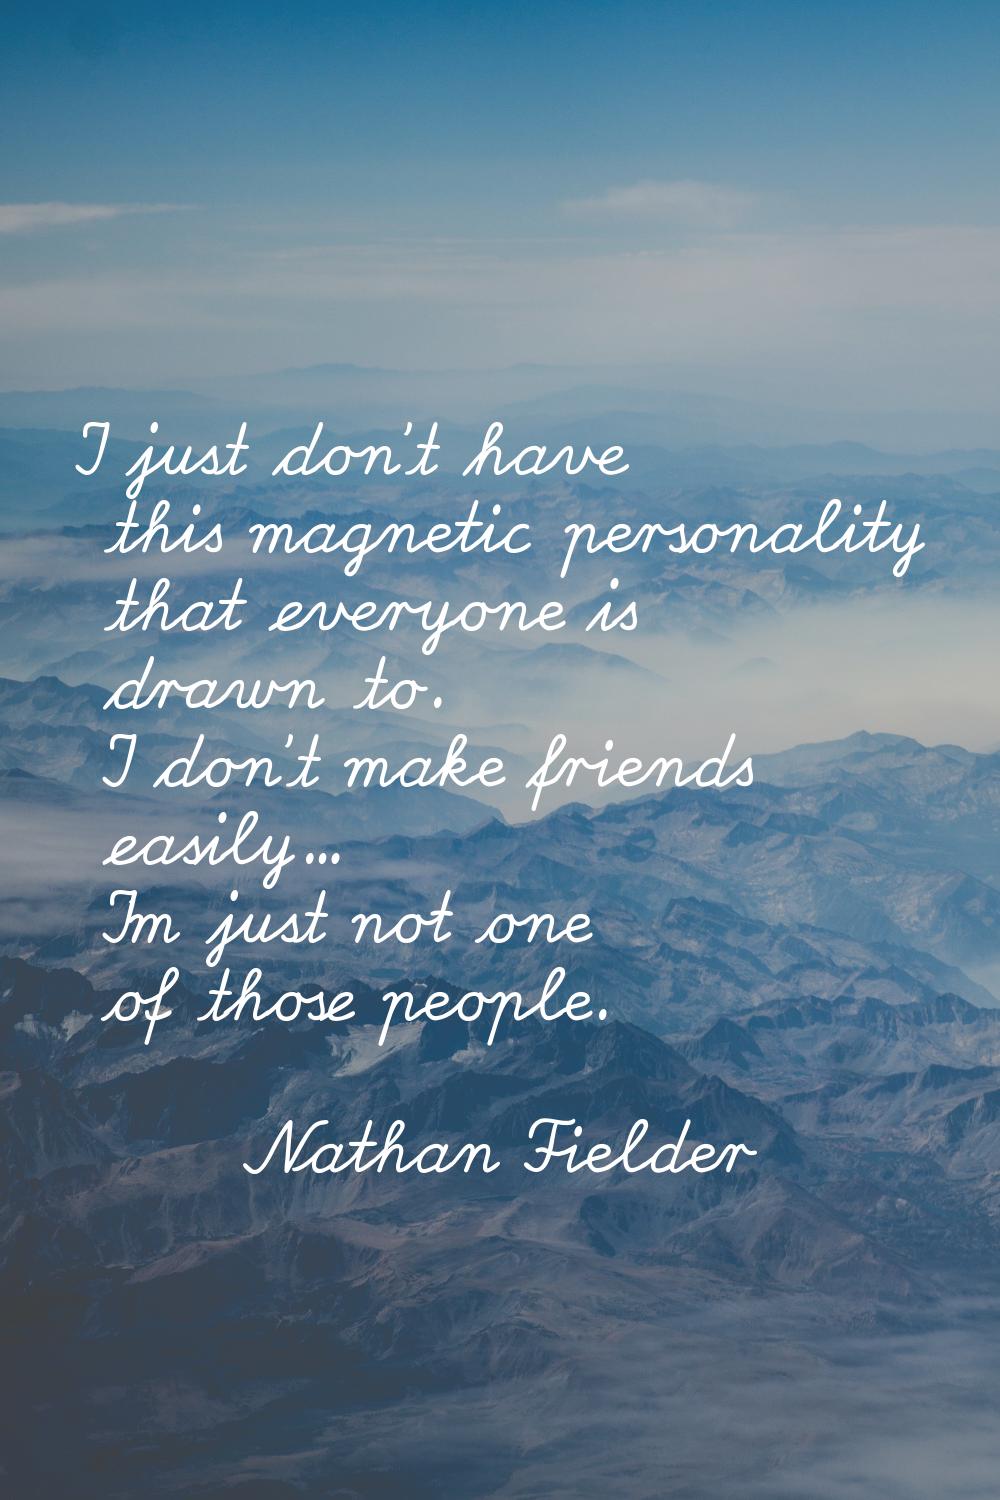 I just don't have this magnetic personality that everyone is drawn to. I don't make friends easily.